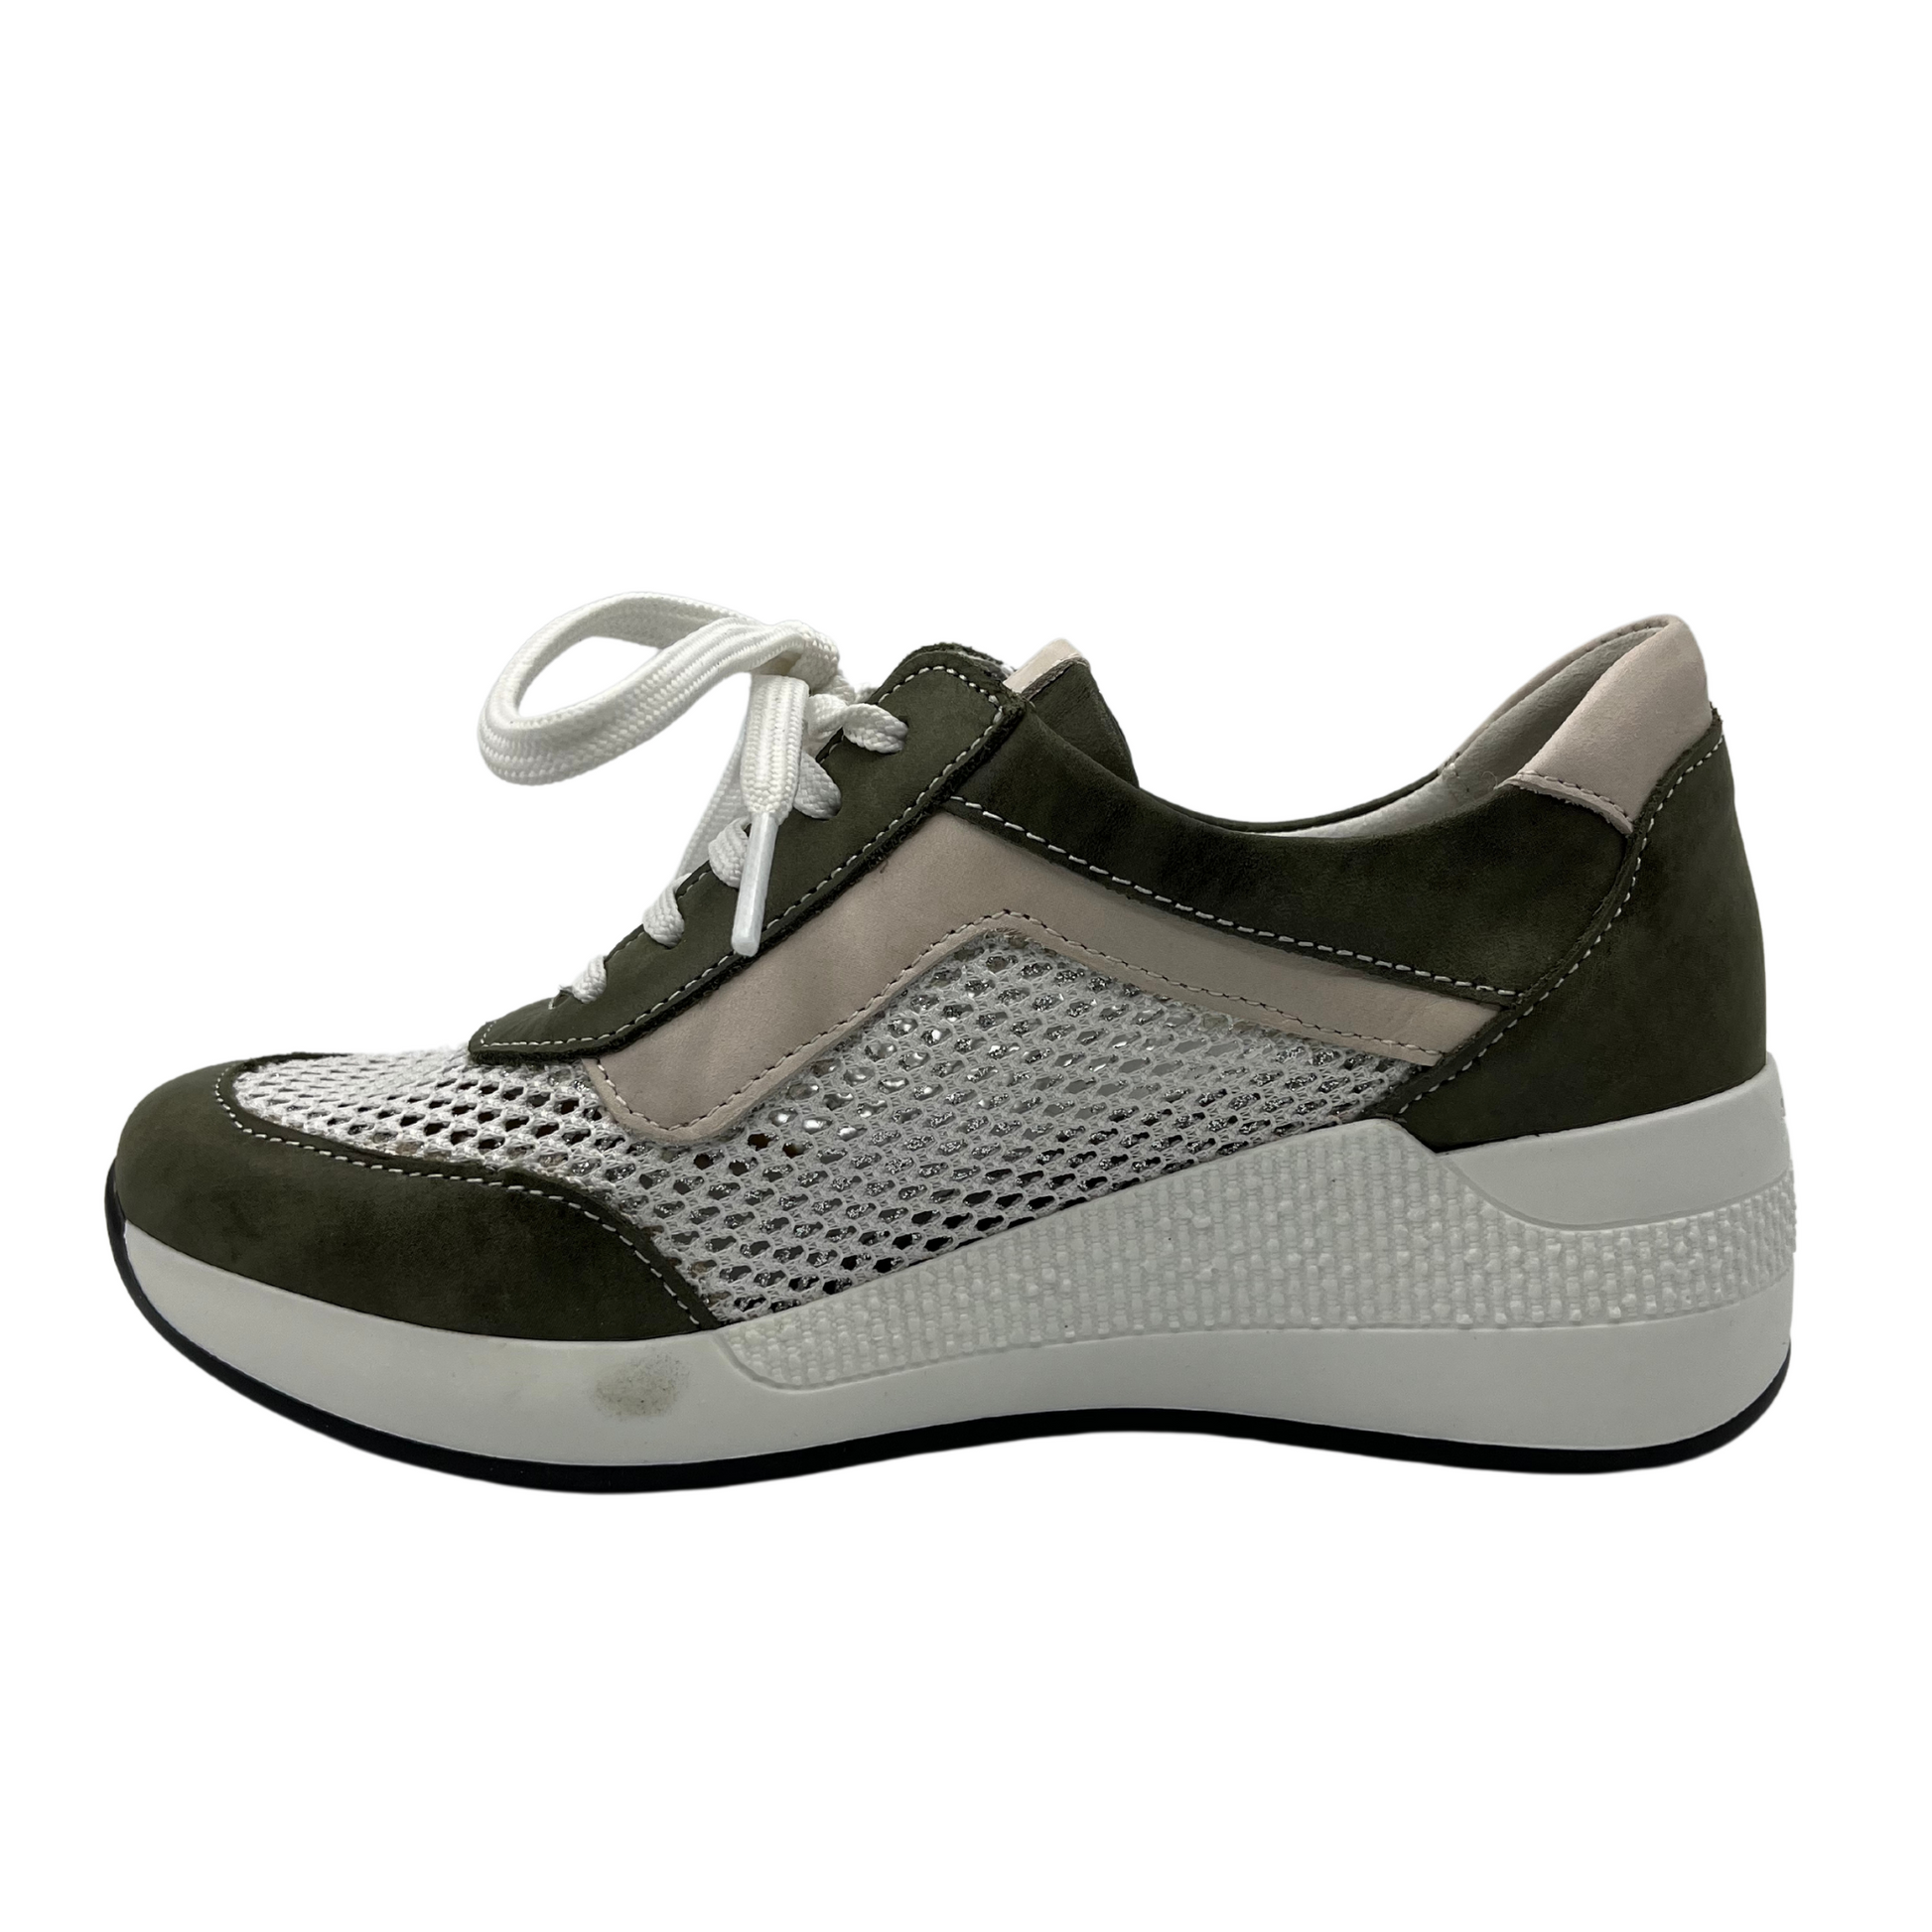 Left facing view of women's wedge sneaker with white laces, mesh sides and white rubber outsole